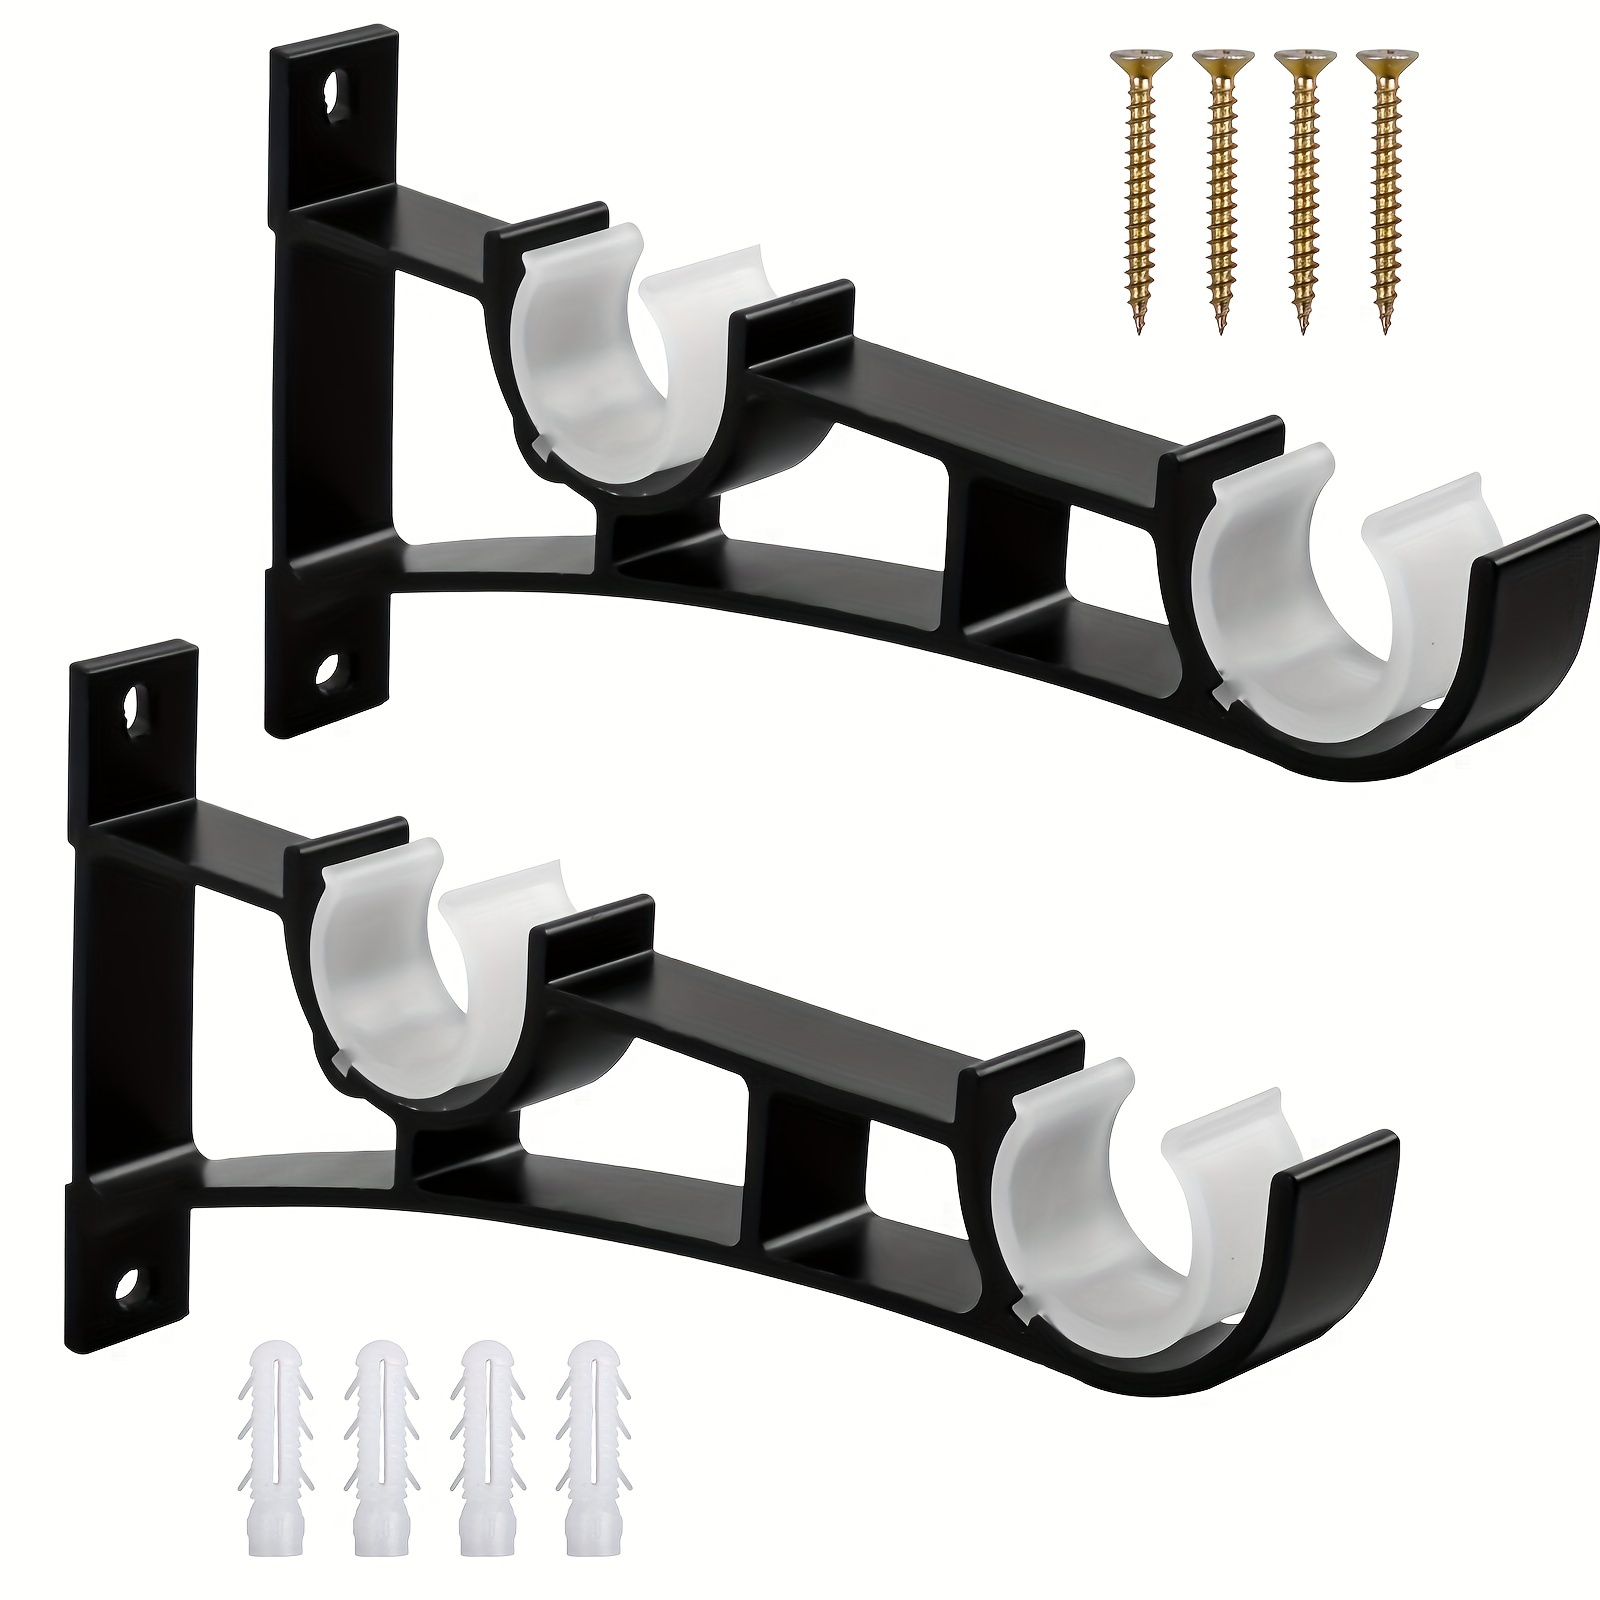 

2 Sets Heavy Duty Curtain Rod Brackets - Double Curtain Rod Holder Hooks For Clothes Rods - Black Metal Curtain Pole Brackets With 4 Screws - Supports Up To 50kg